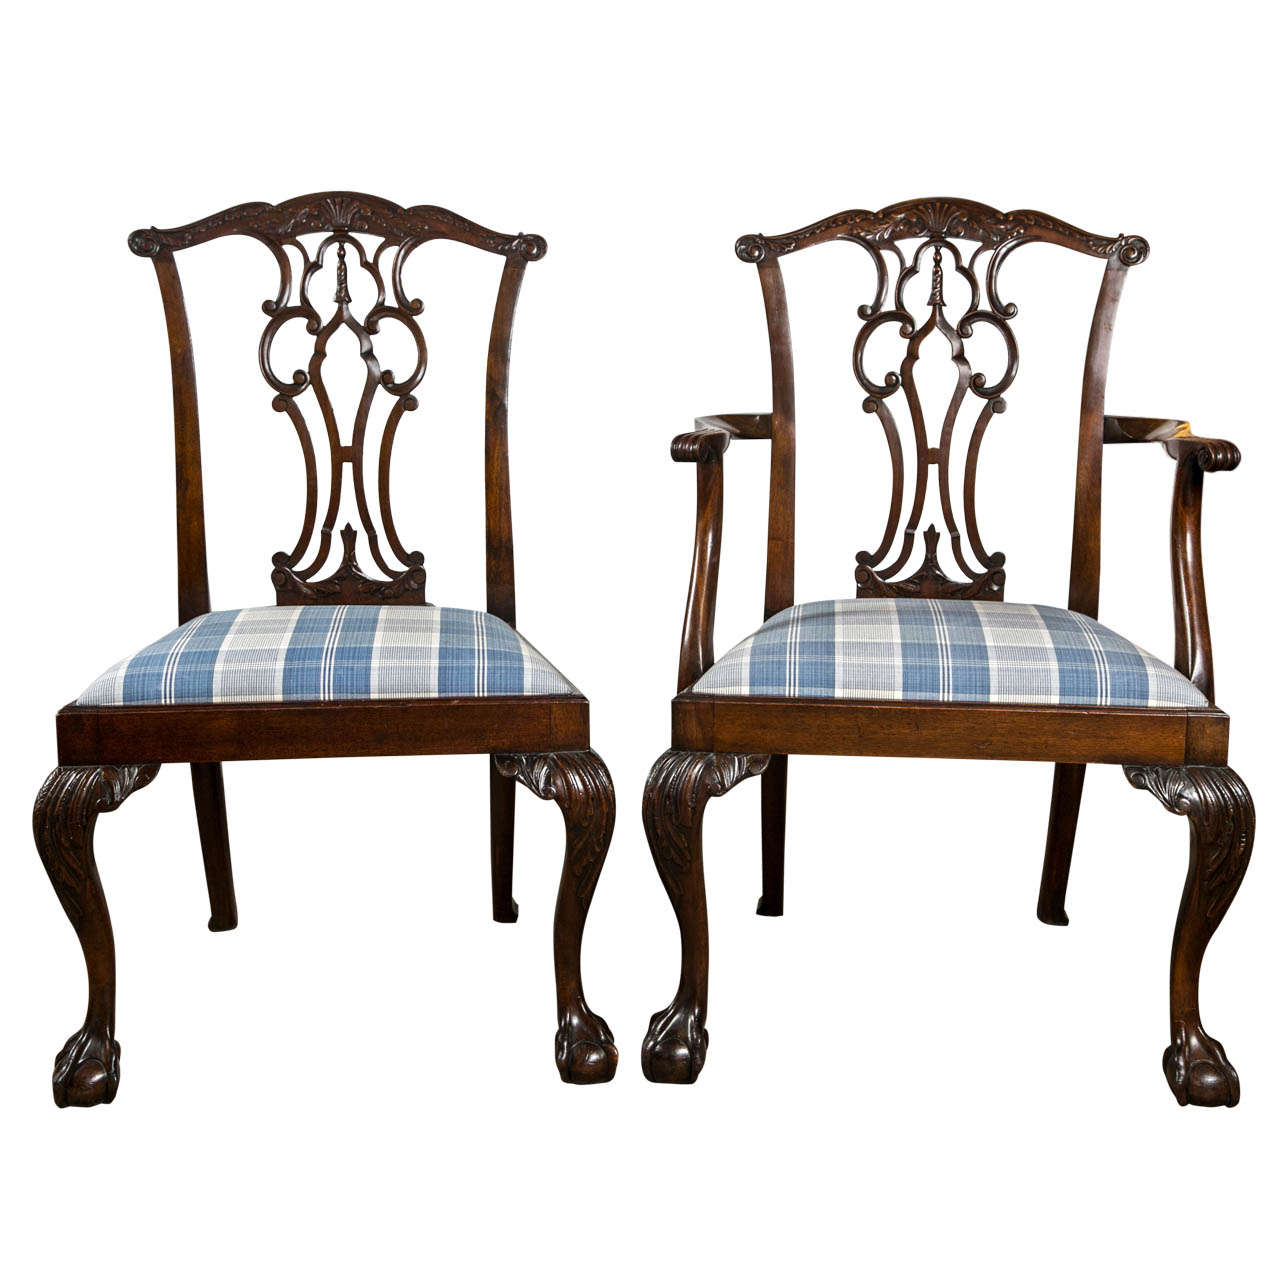 Ball And Claw Dining Chairs 5 For, Ball And Claw Dining Room Chairs